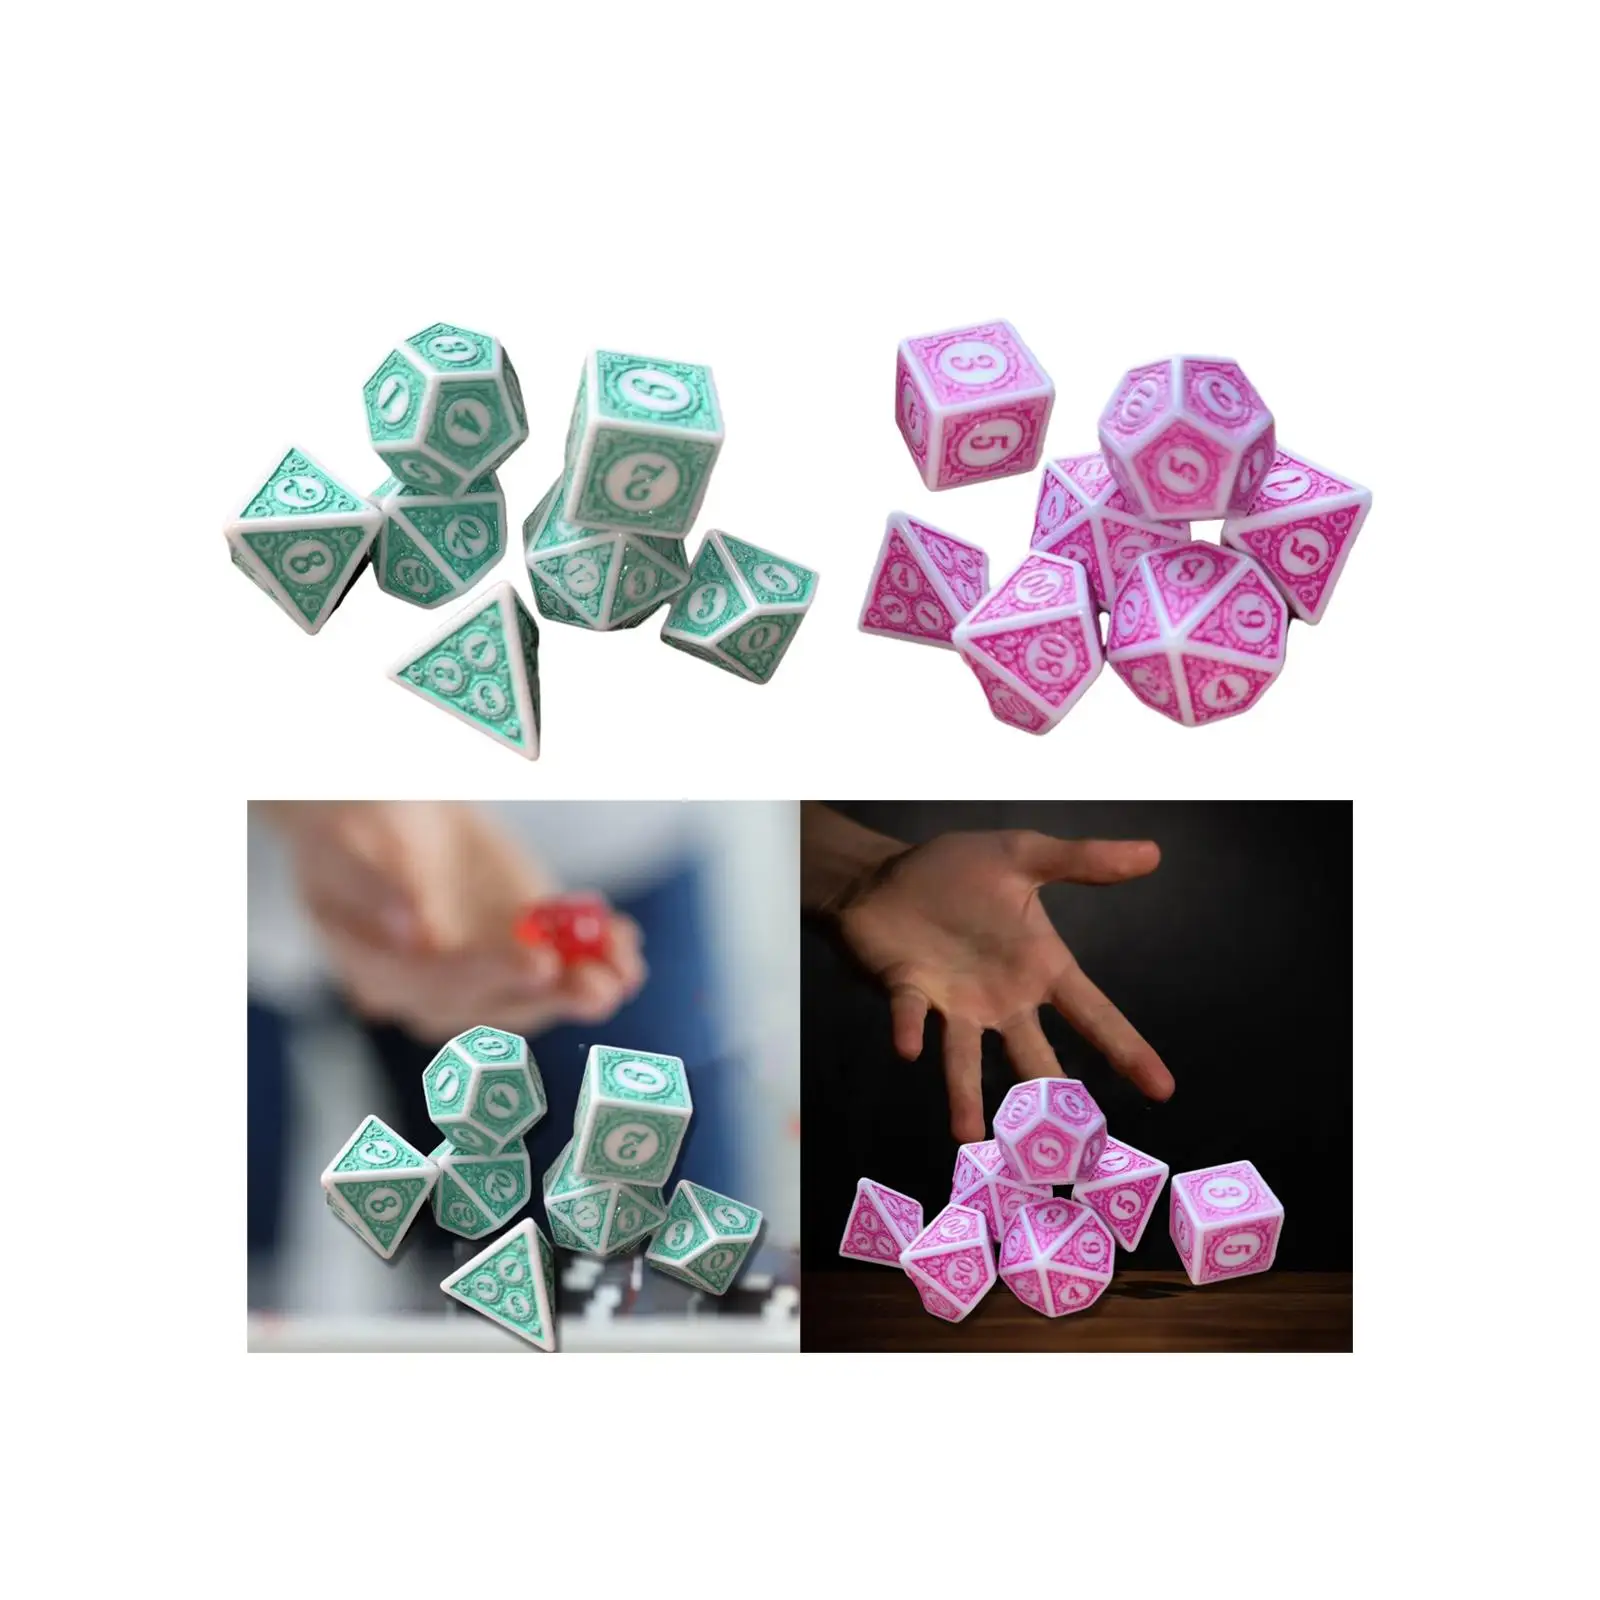 7 Pieces Dice Set Acrylic Entertainment Toys Party Game Dices Party Supplies Game Dices Set for Bar Party KTV Role Playing Game